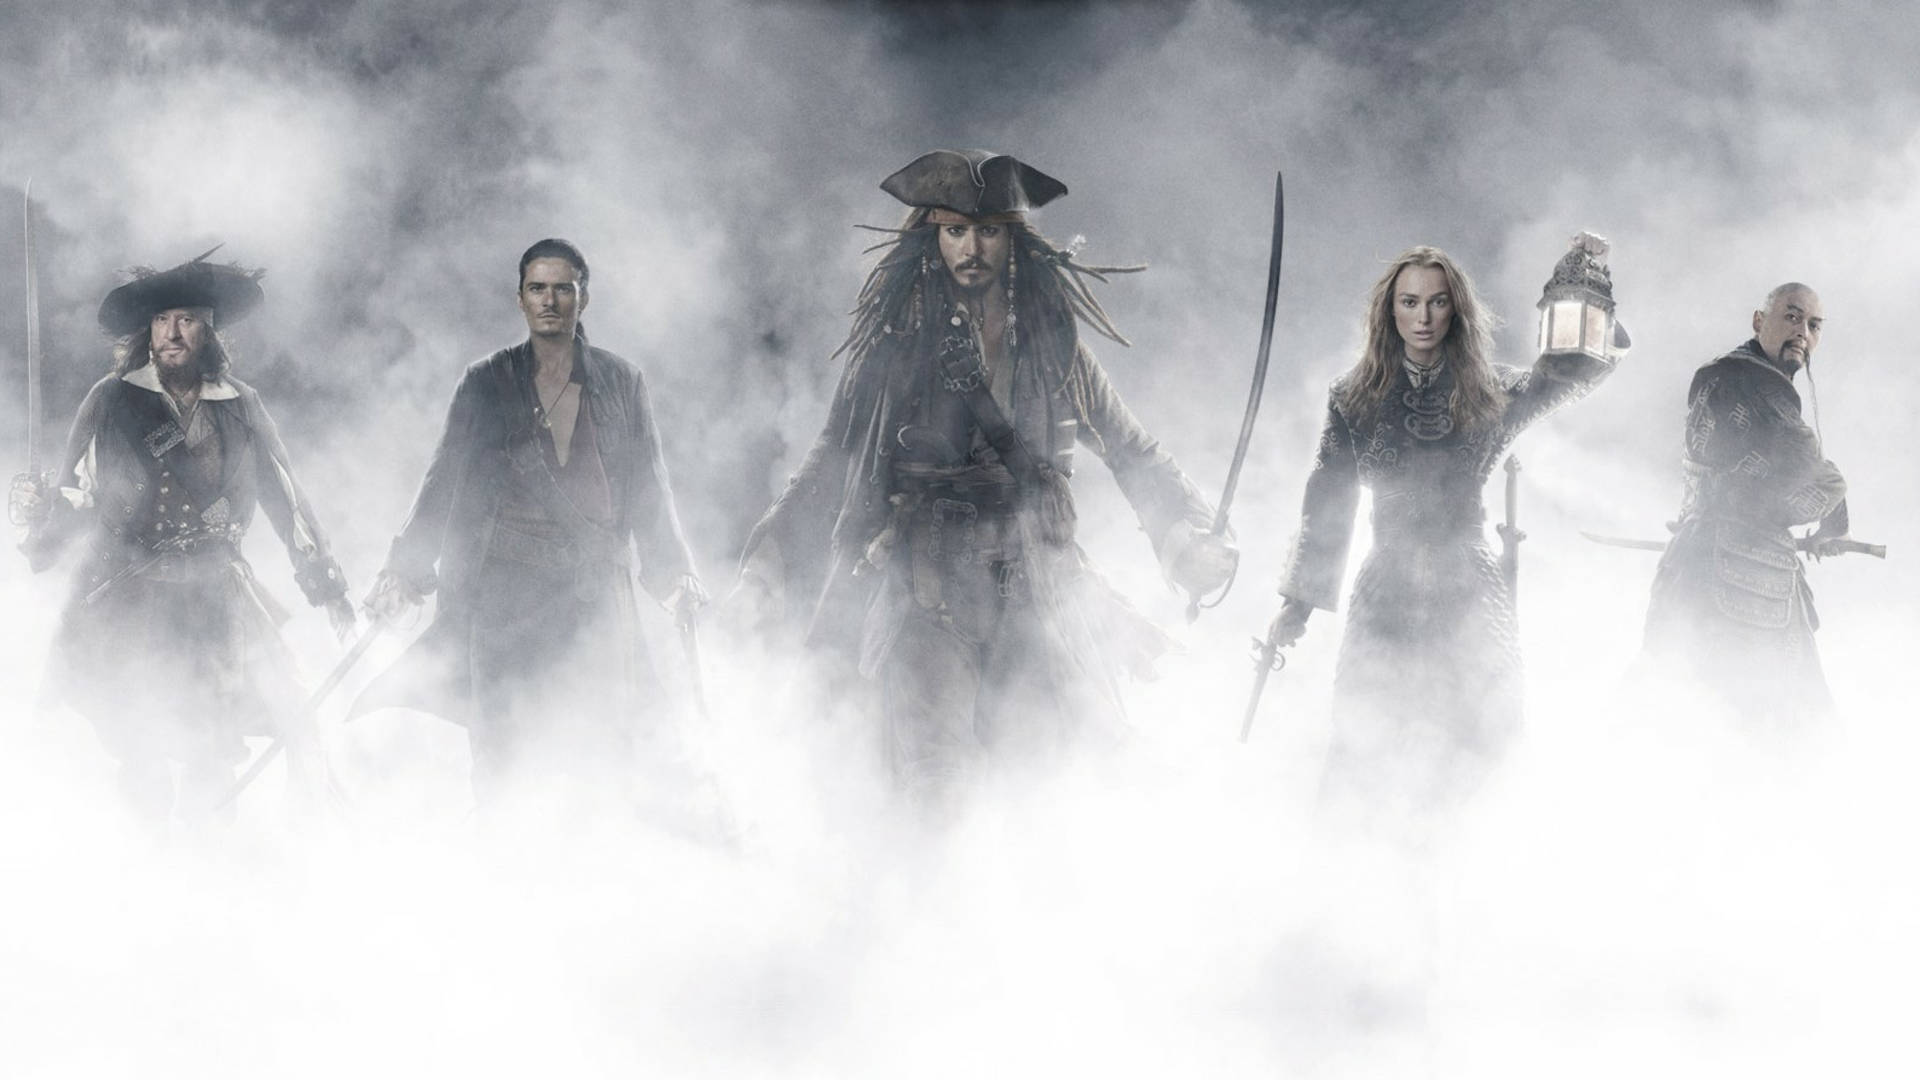 Caption: Iconic Pirates of the Caribbean Cast Wallpaper